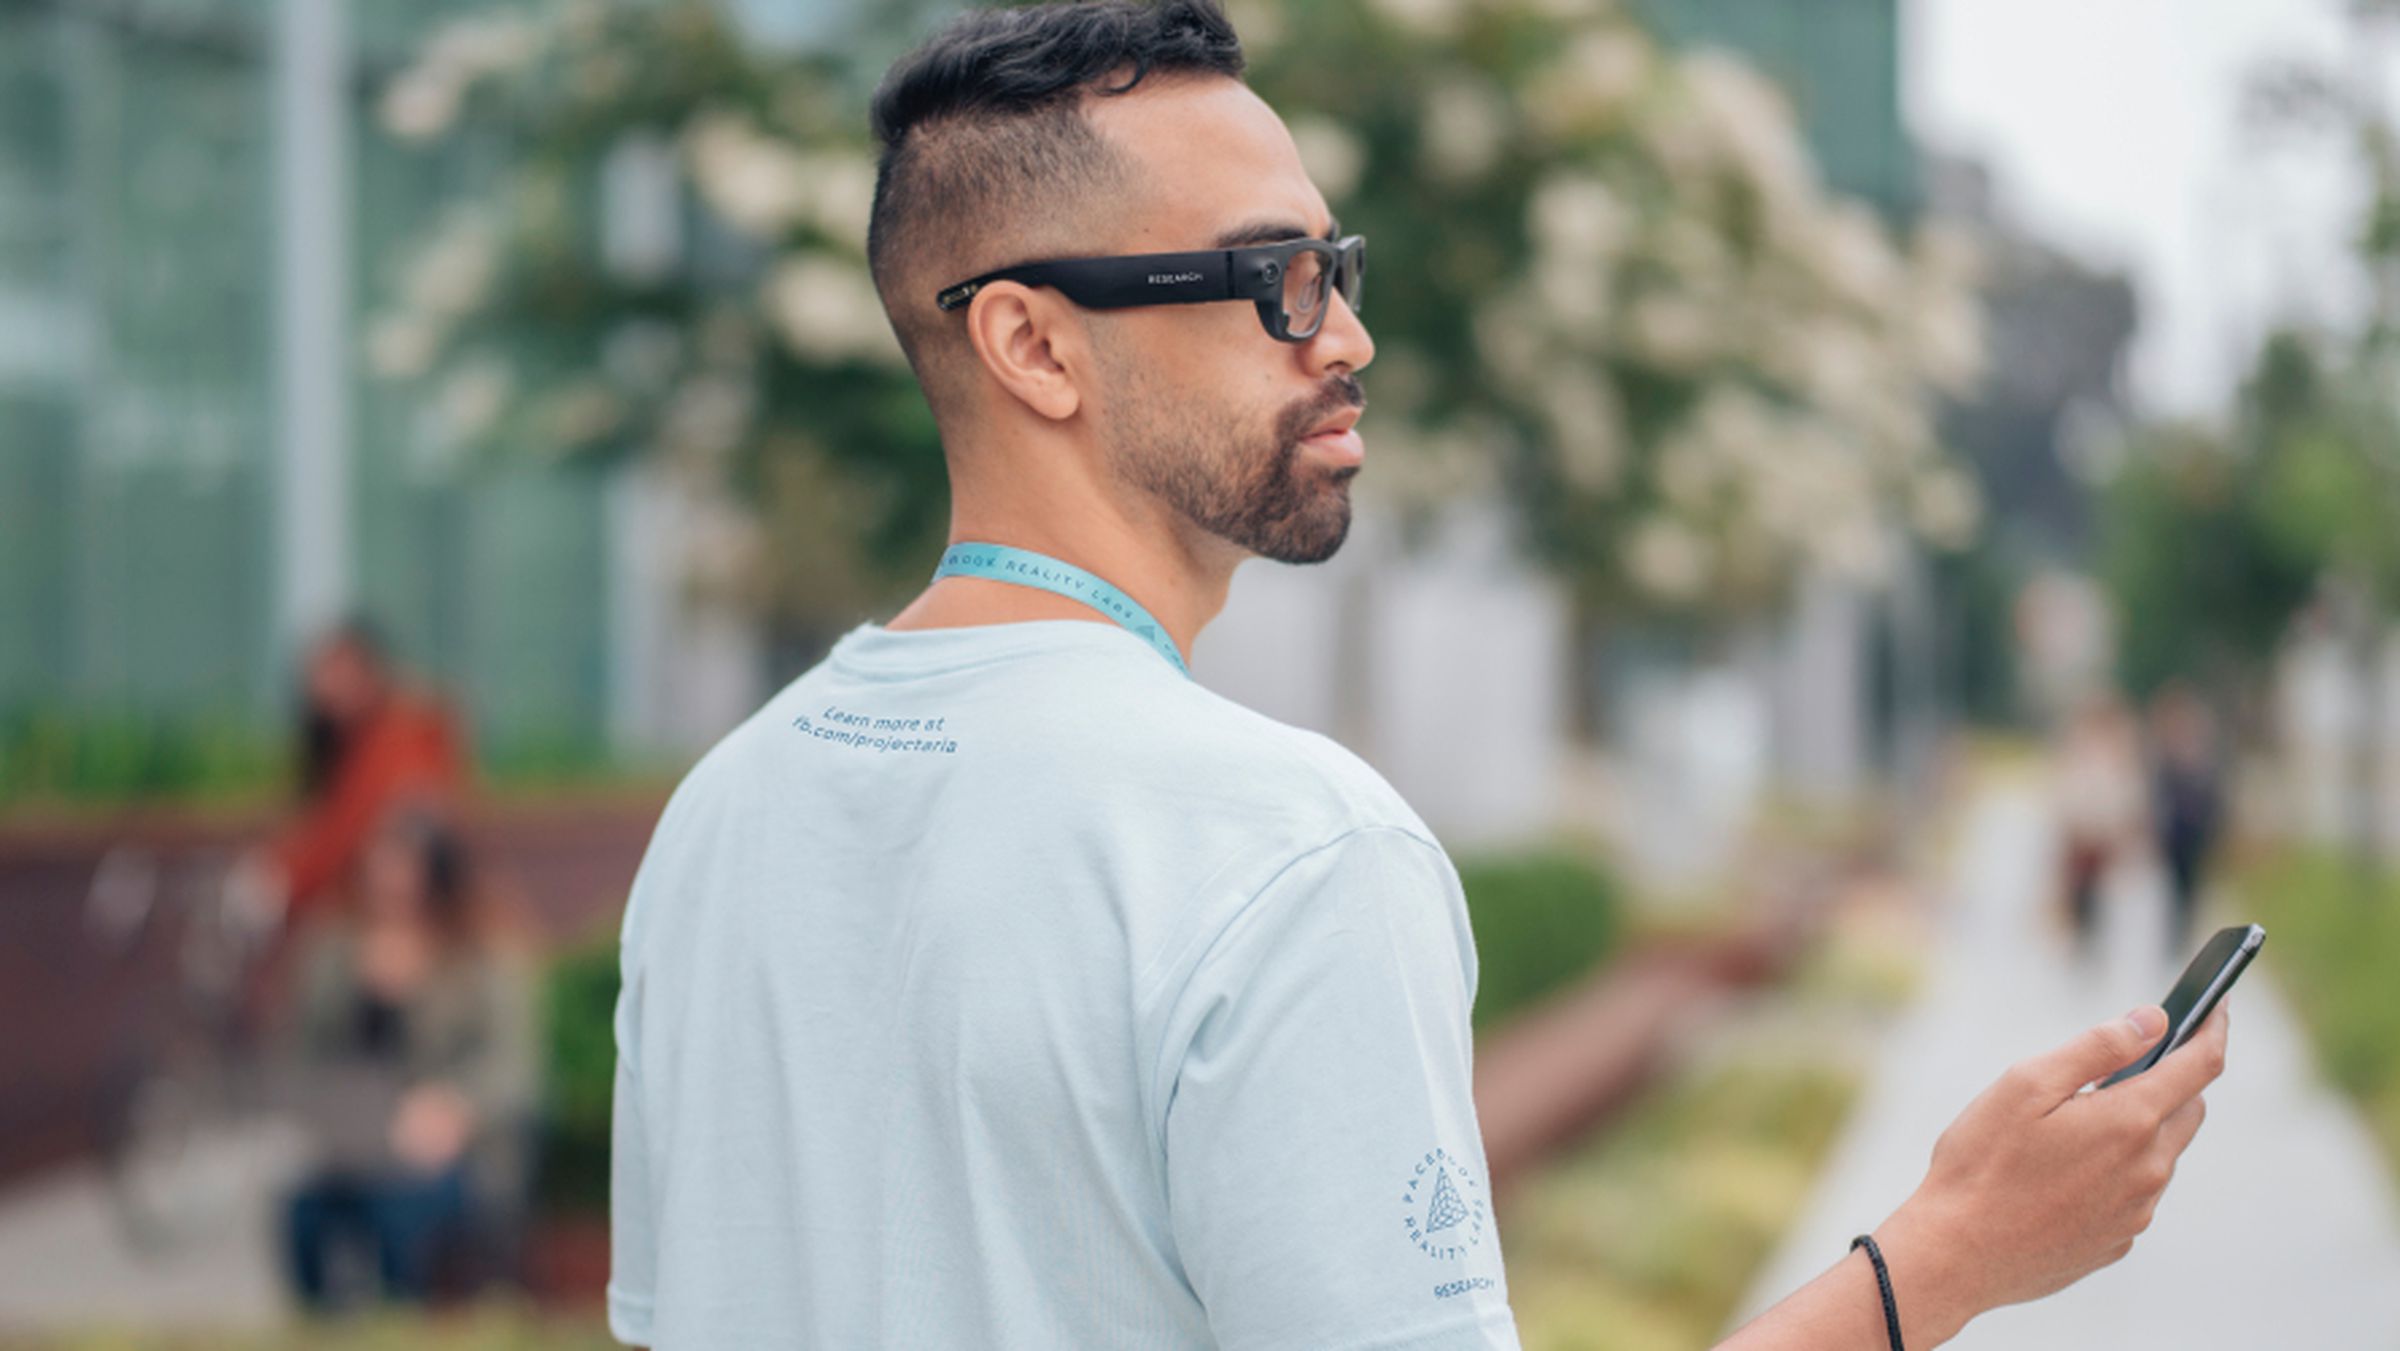 Facebook has released images showing prototype pairs of its augmented-reality smart glasses. 